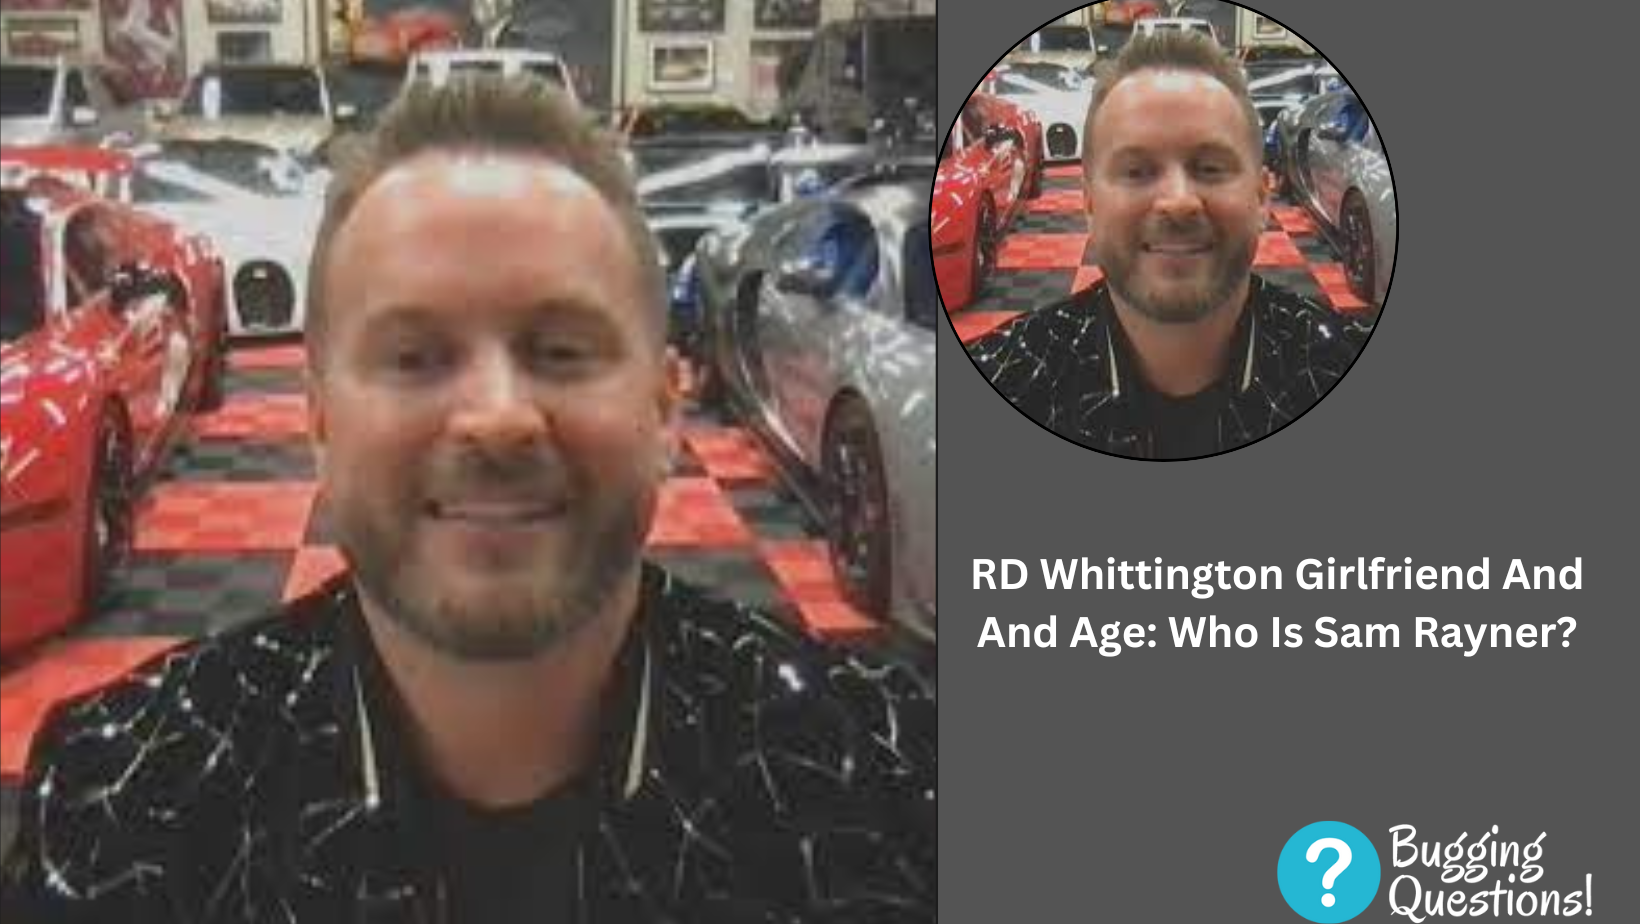 RD Whittington Girlfriend And And Age: Who Is Sam Rayner?